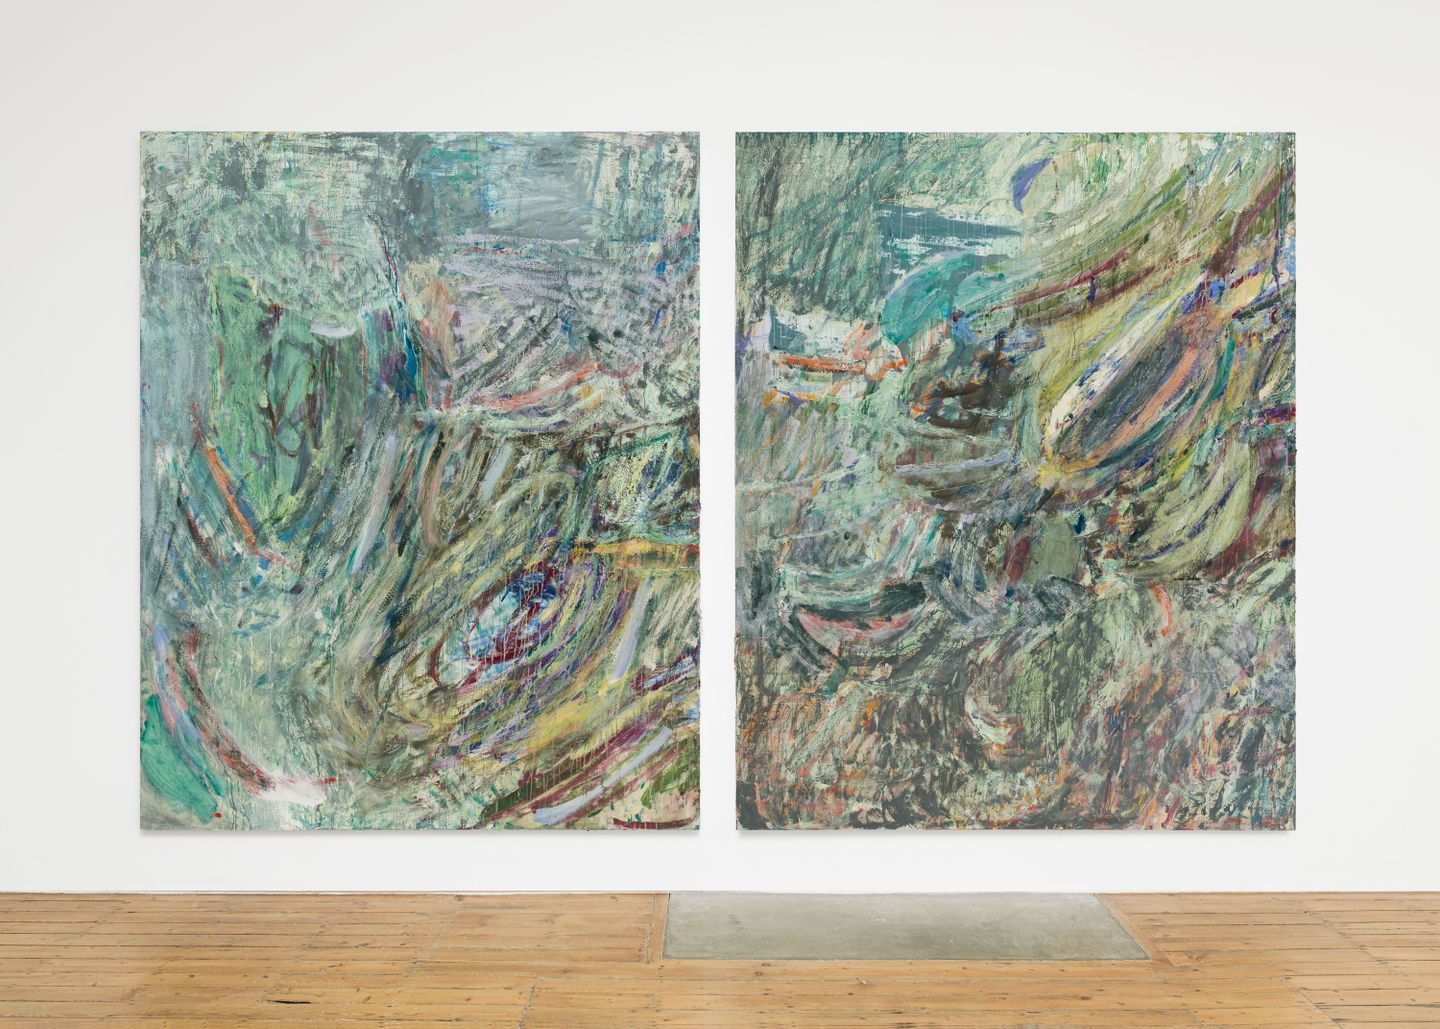 Pam Evelyn, Built on clay (2022). Oil on linen. Diptych. Overall dimensions: 250 x 400 cm; each panel: 250 x 200 cm Courtesy the artist and The Approach. Photo: Michael Brzezinski.